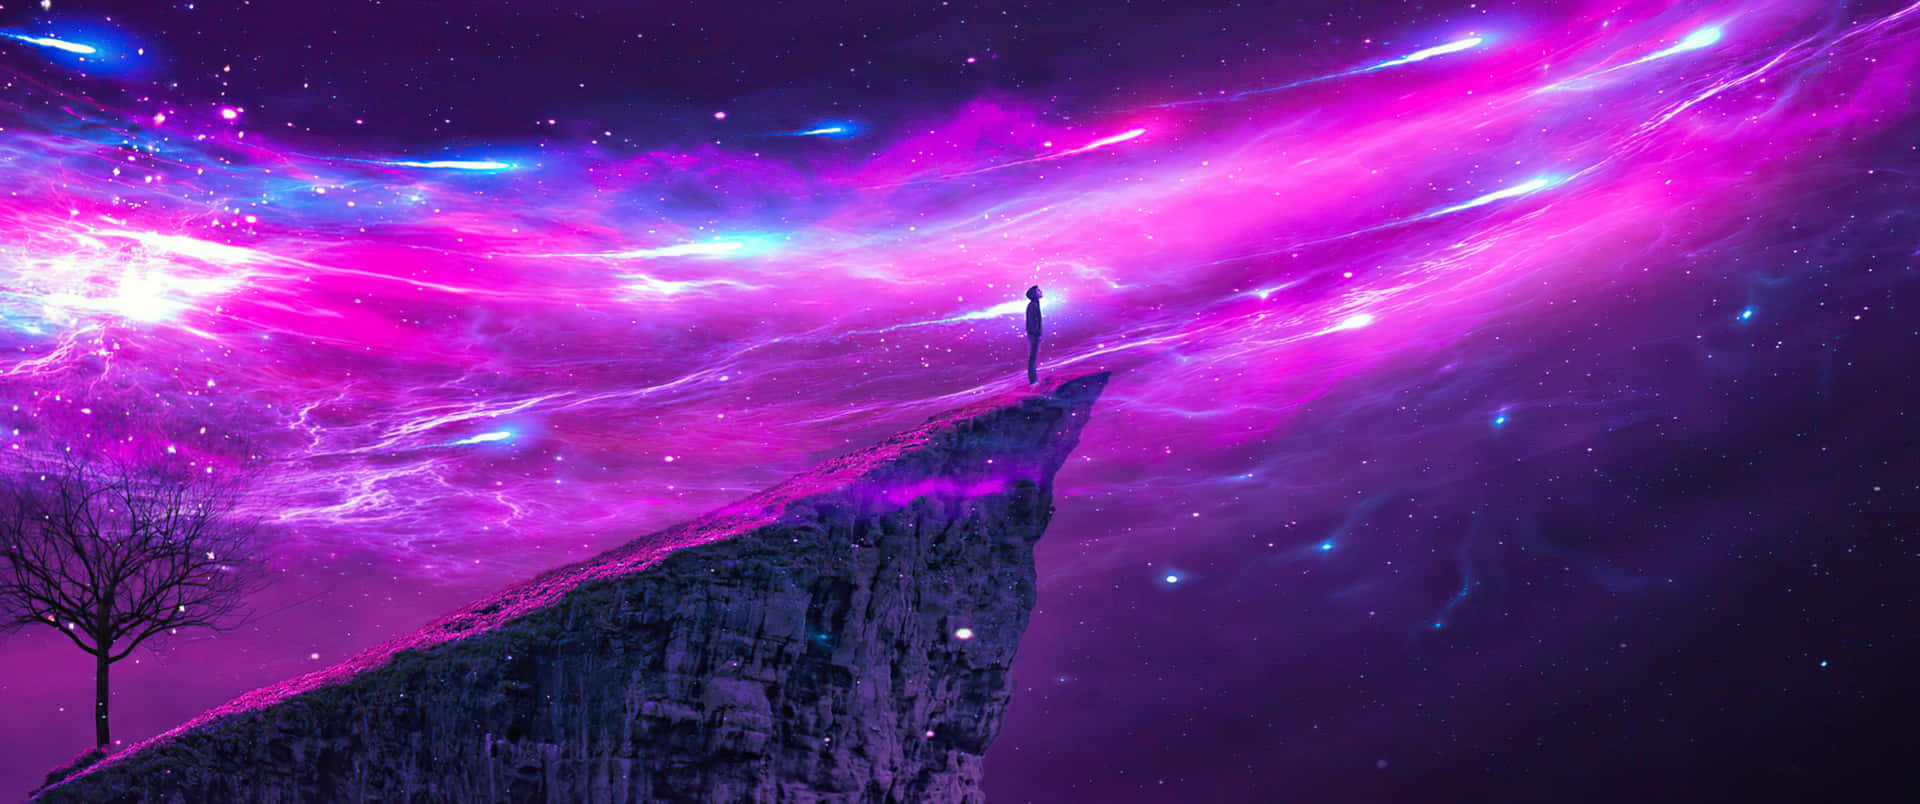 Witness the infinite and expansive beauty of space in this 3440x1440 ultra-wide wallpaper. Wallpaper